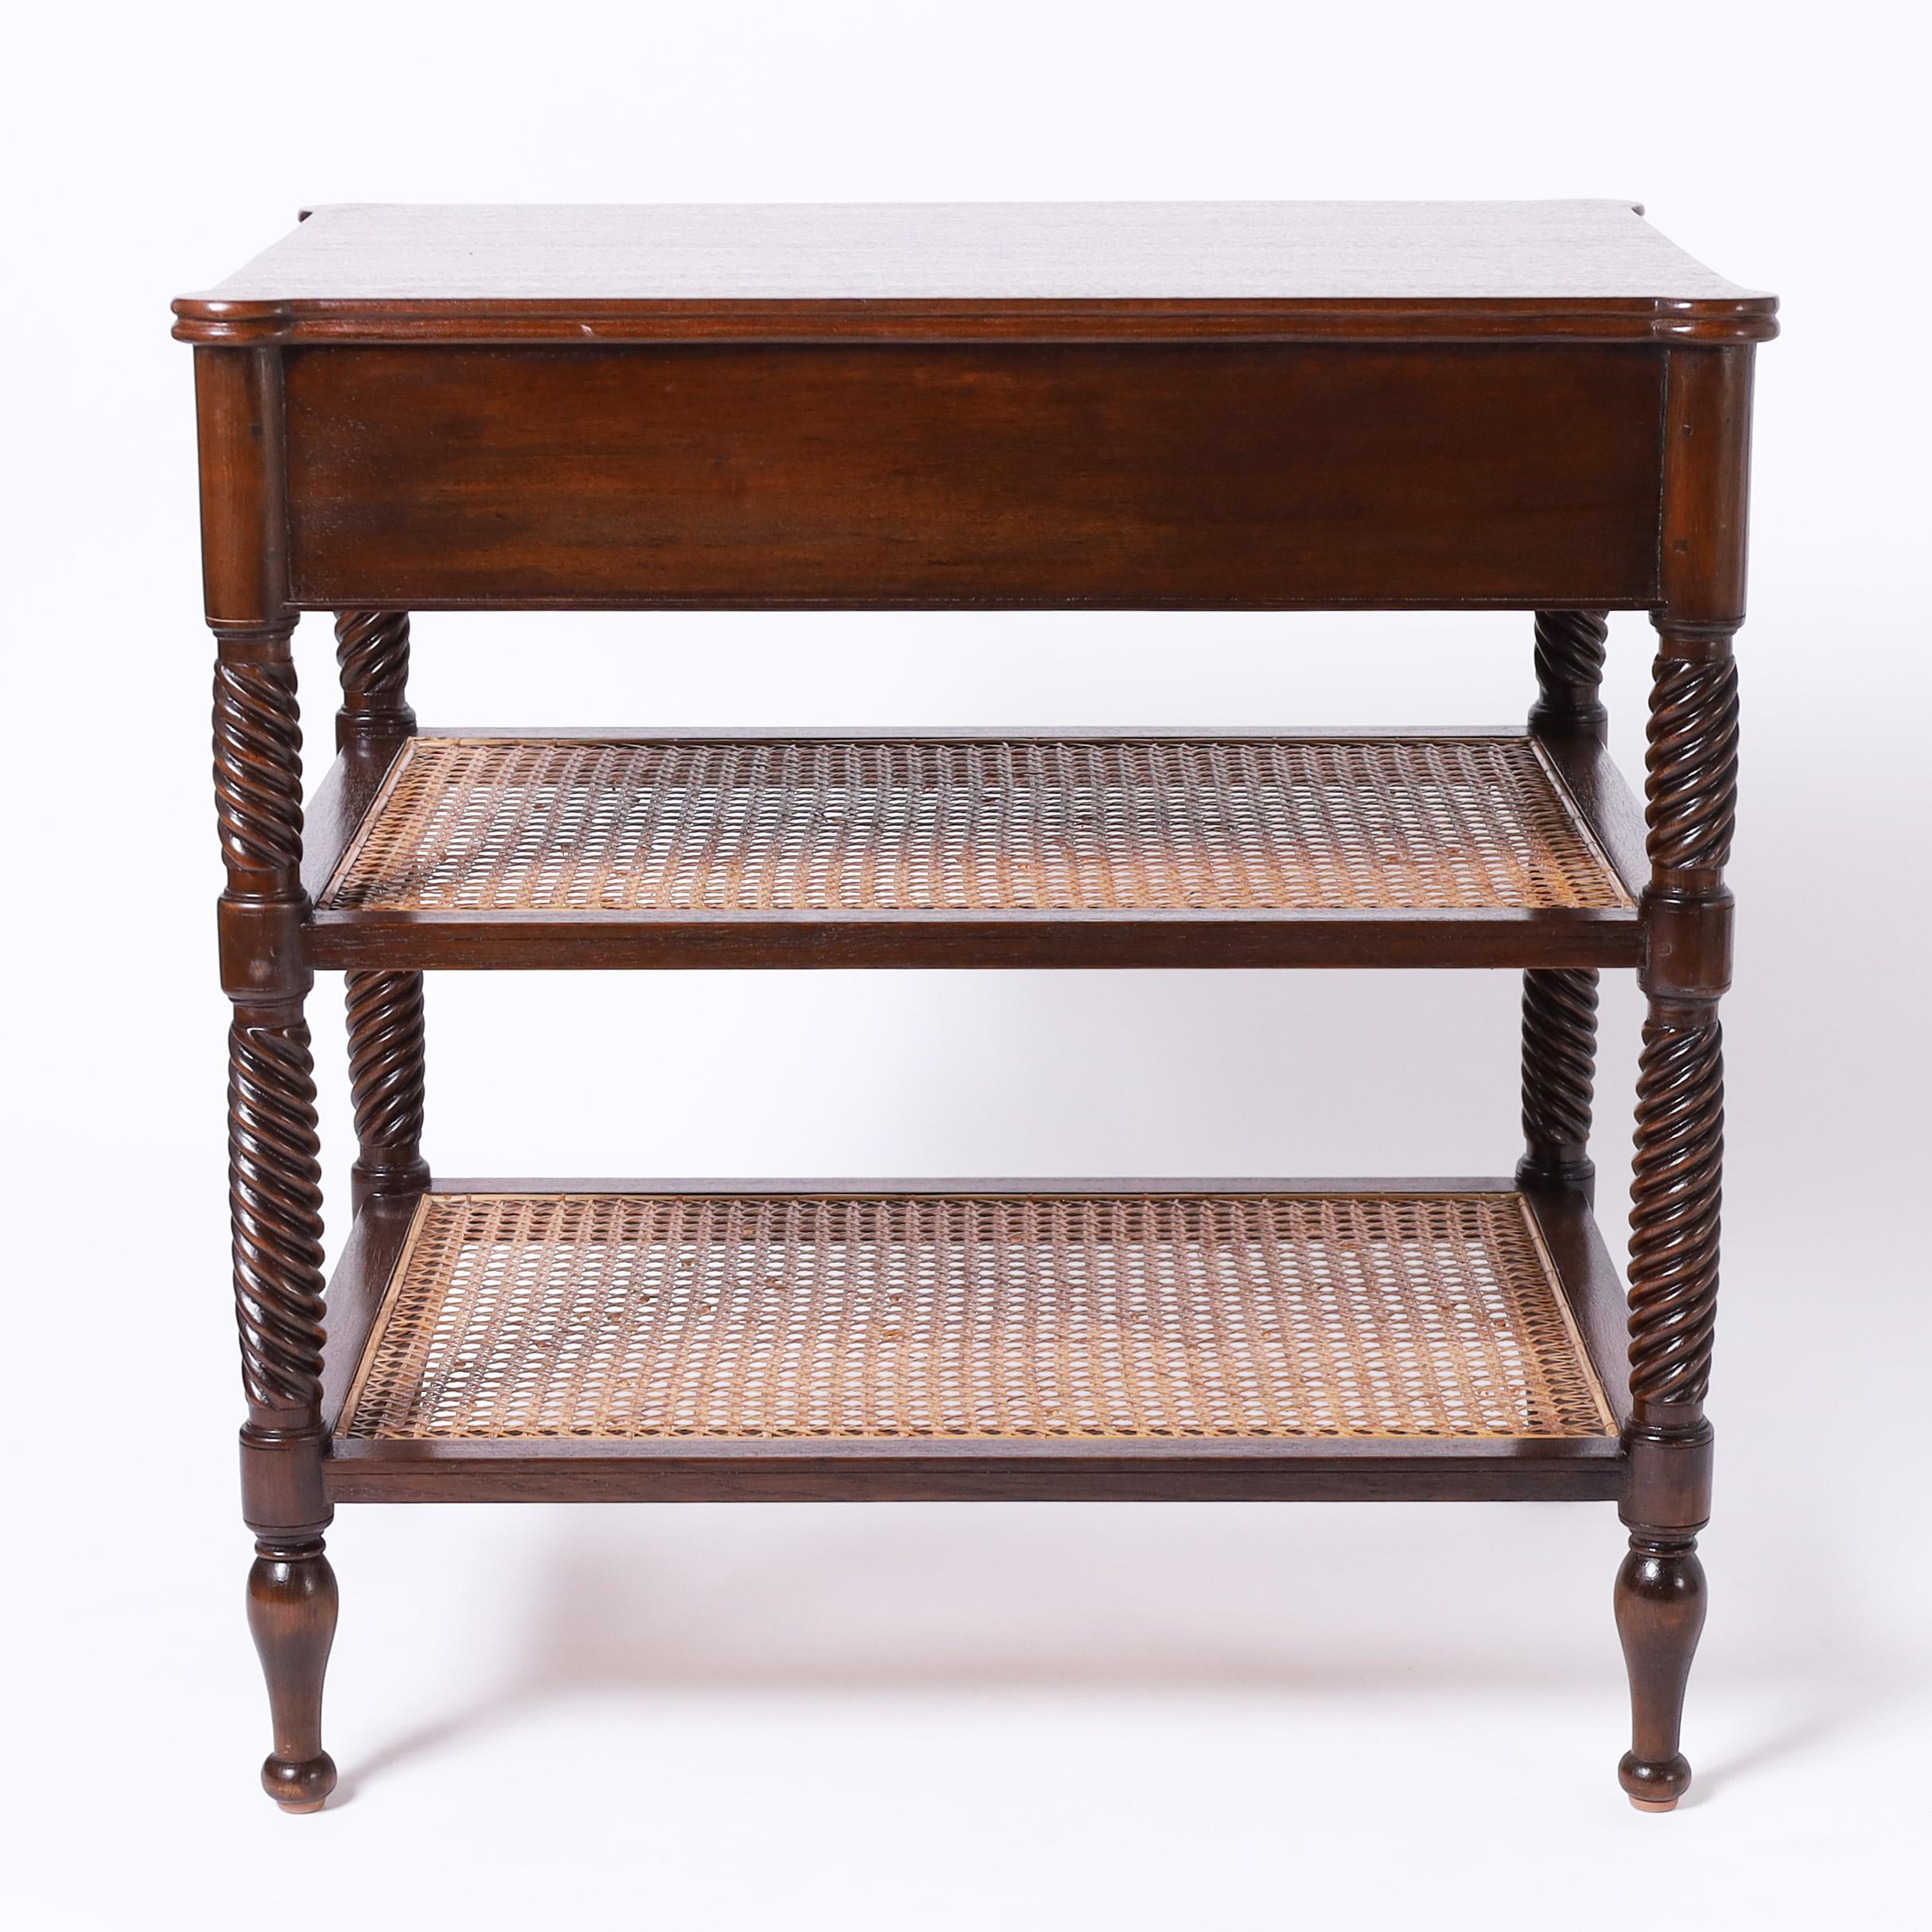 British Colonial Style Three Tiered Caned Stand or Table In Good Condition For Sale In Palm Beach, FL